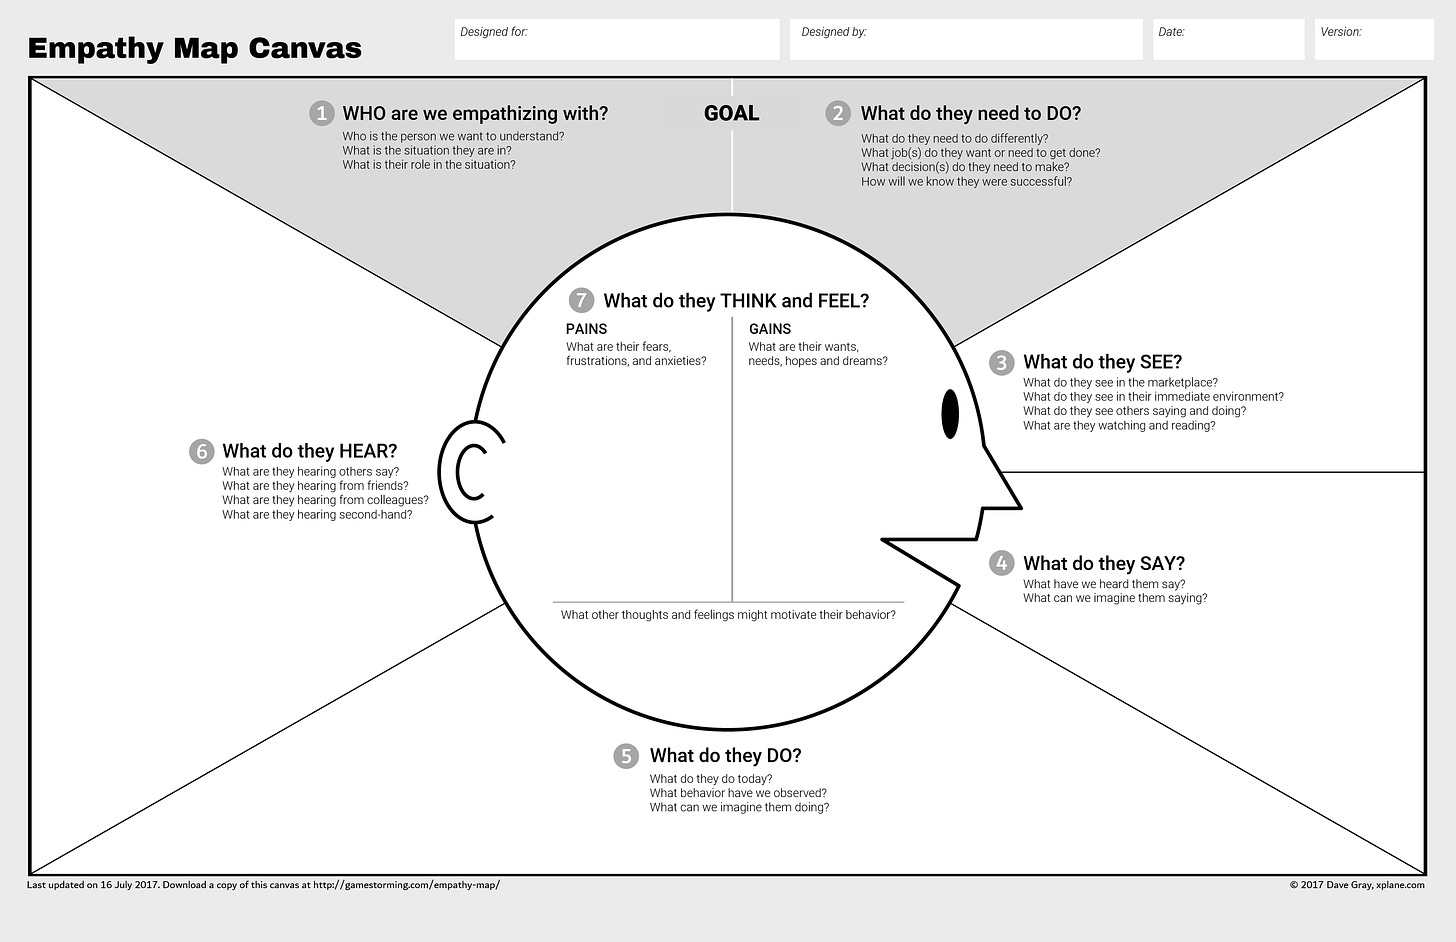 The Empathy Map Canvas